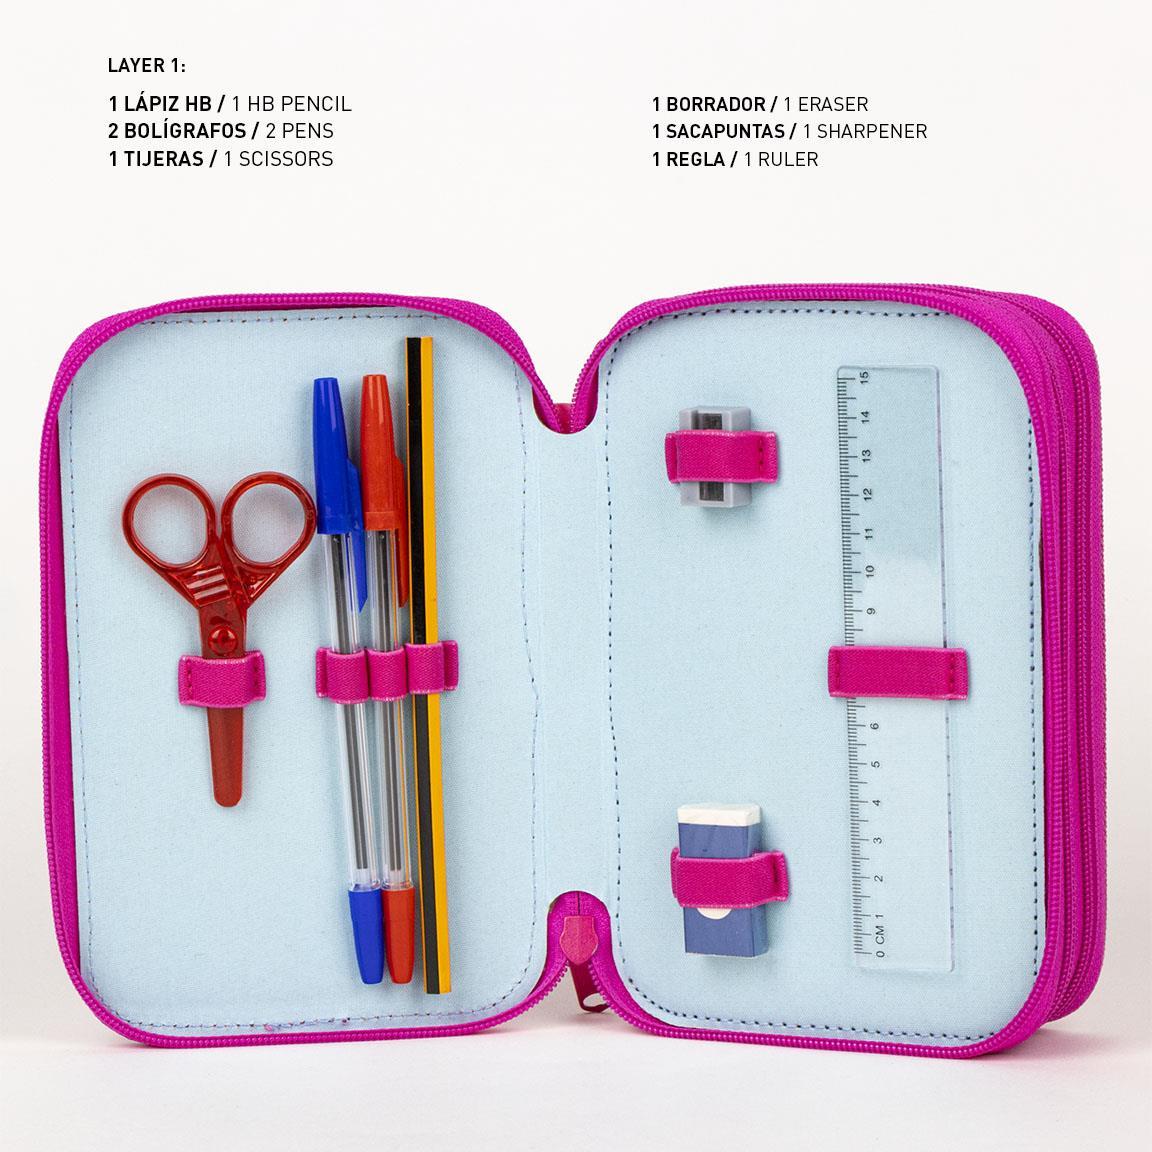 Trousse scolaire fille Pat Patrouille Free To Be Me